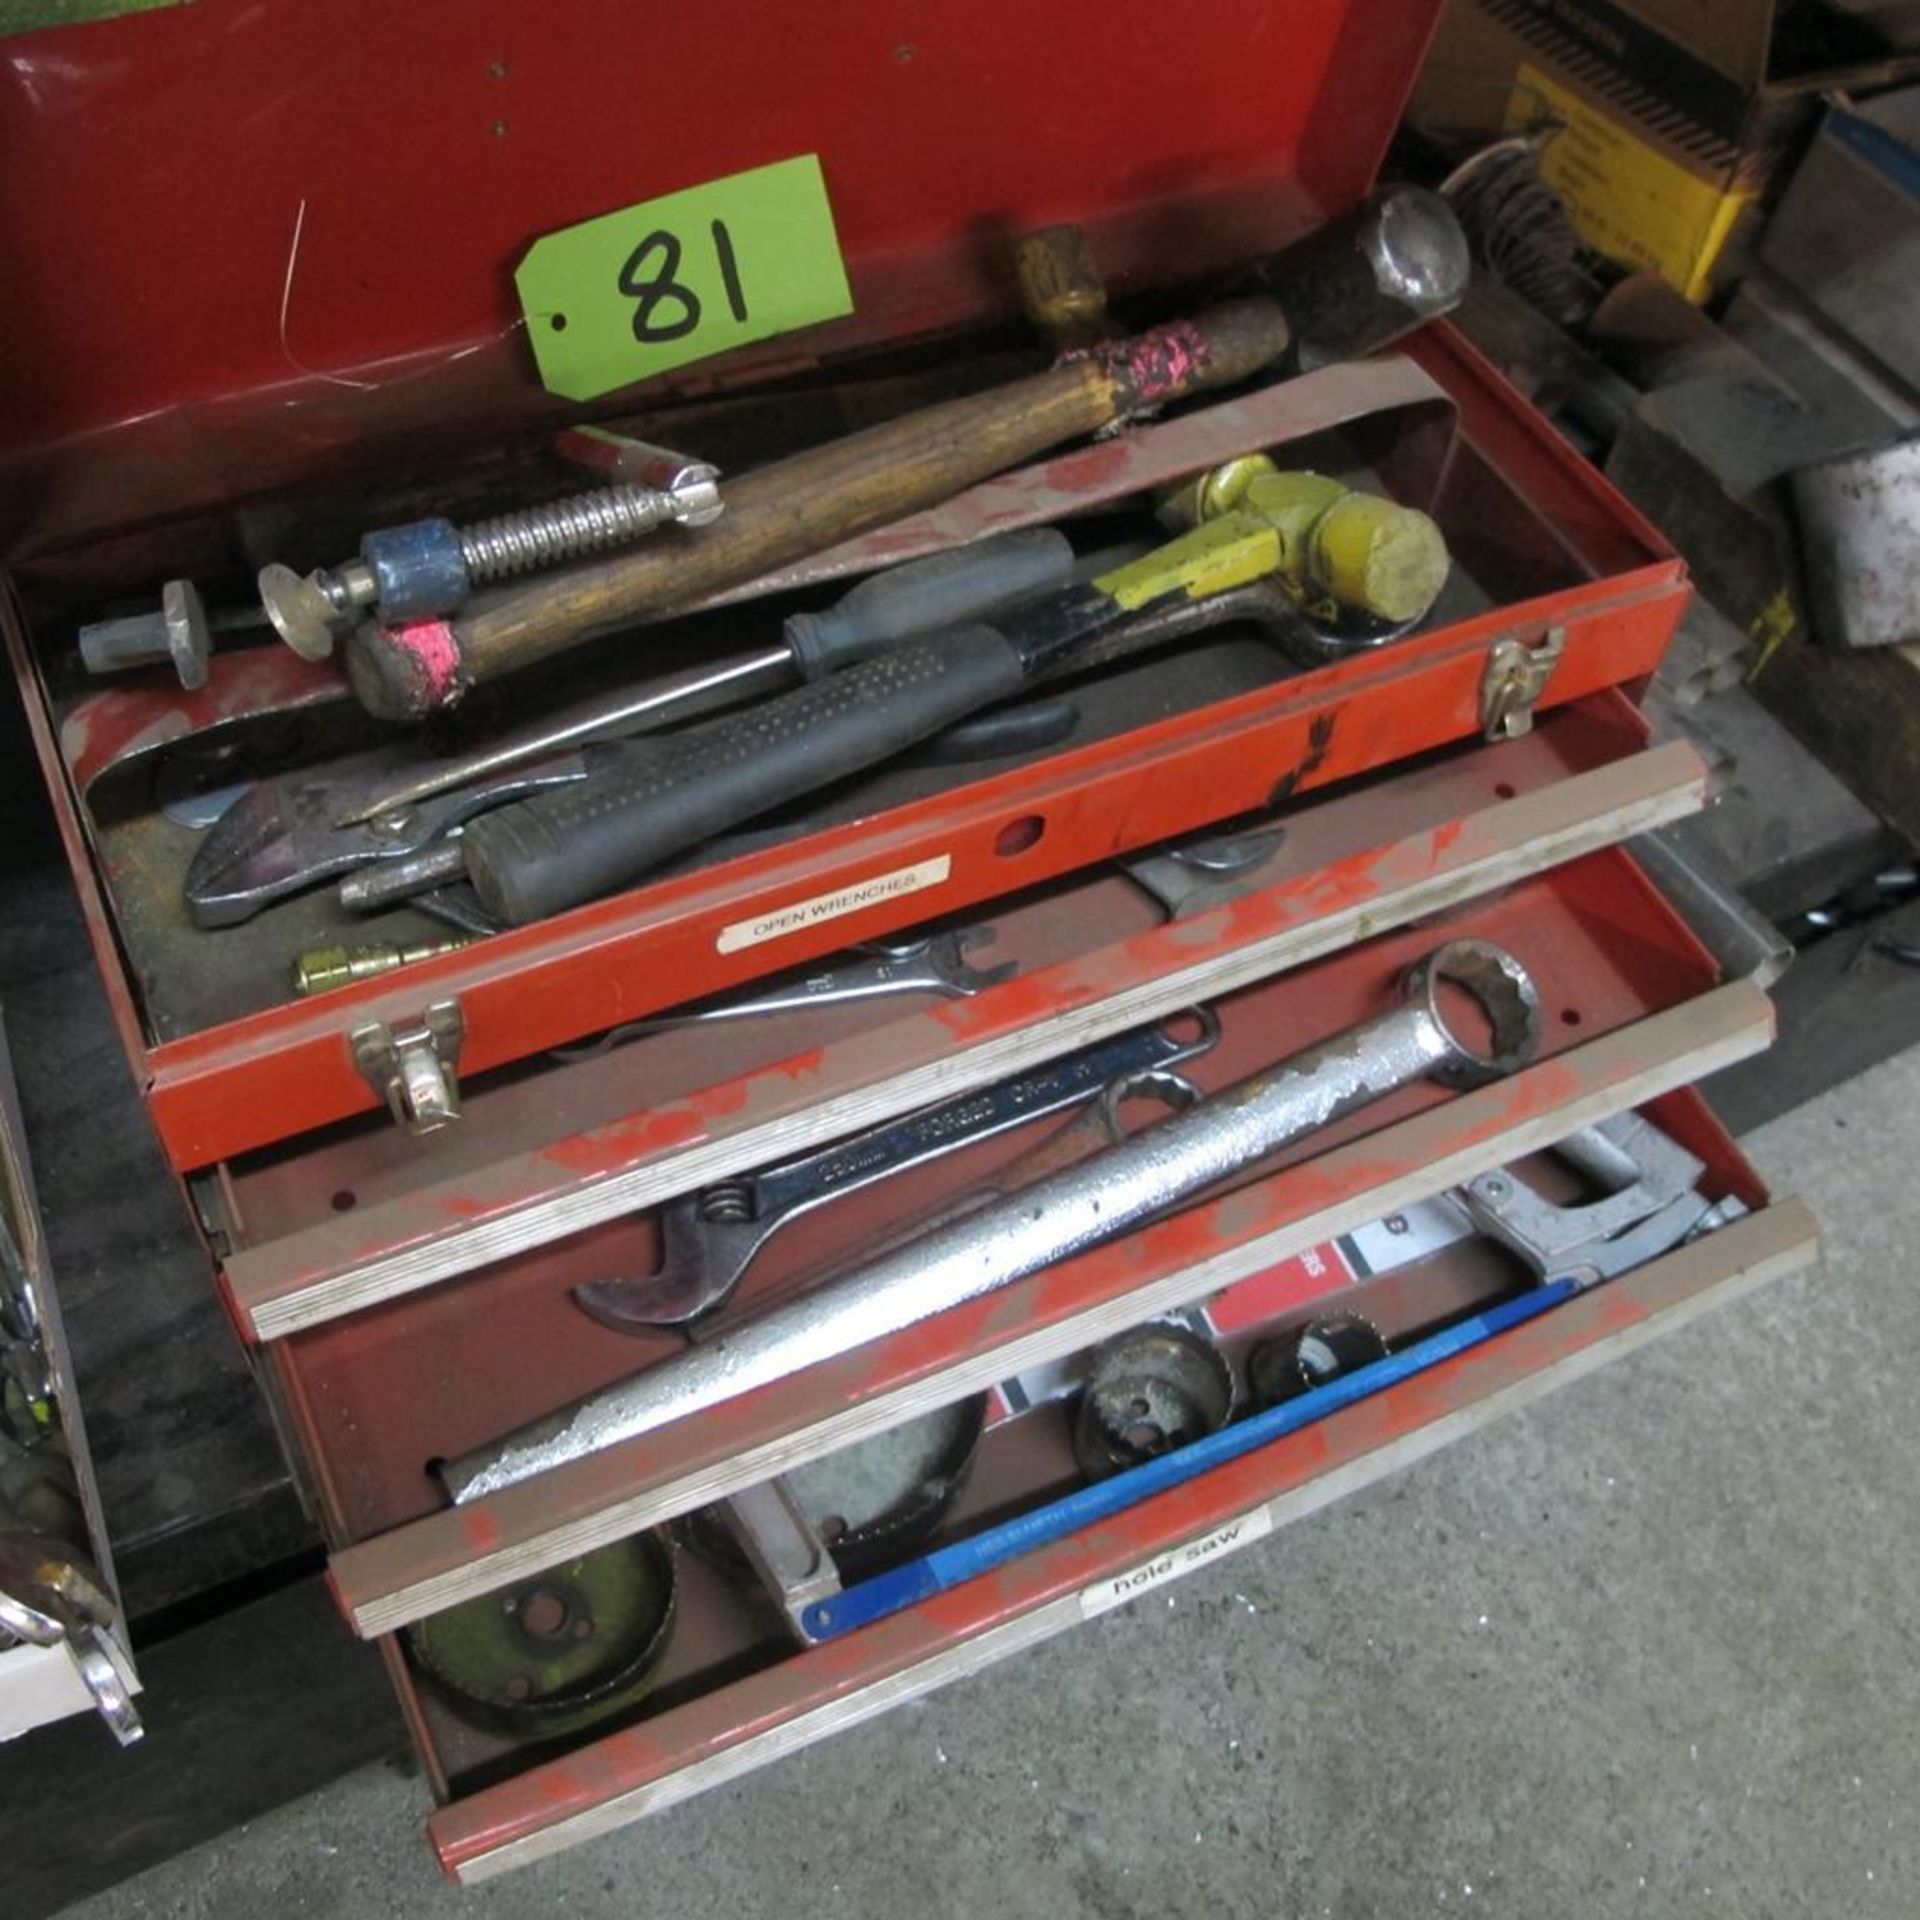 3 DRAWER TOOL BOX W/TOOLS (IN WEST BLDG)